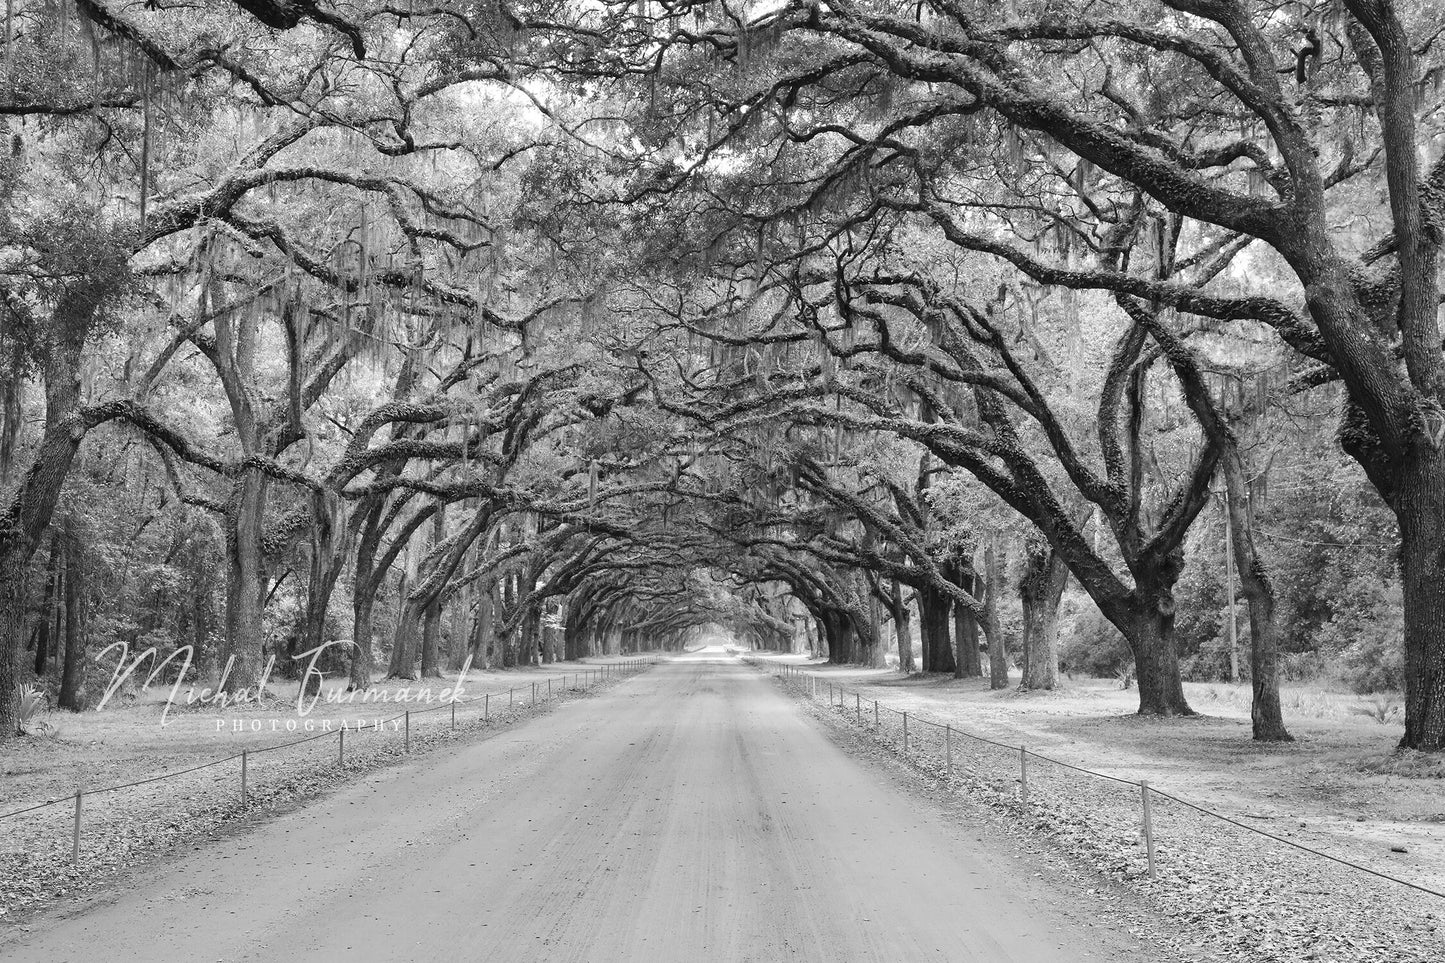 Alley of Live Oaks photo, black and white tree art, alley of trees picture, tree tunnel print, Georgia wall decor, 5x7 to 16x24 24x30 40x60"